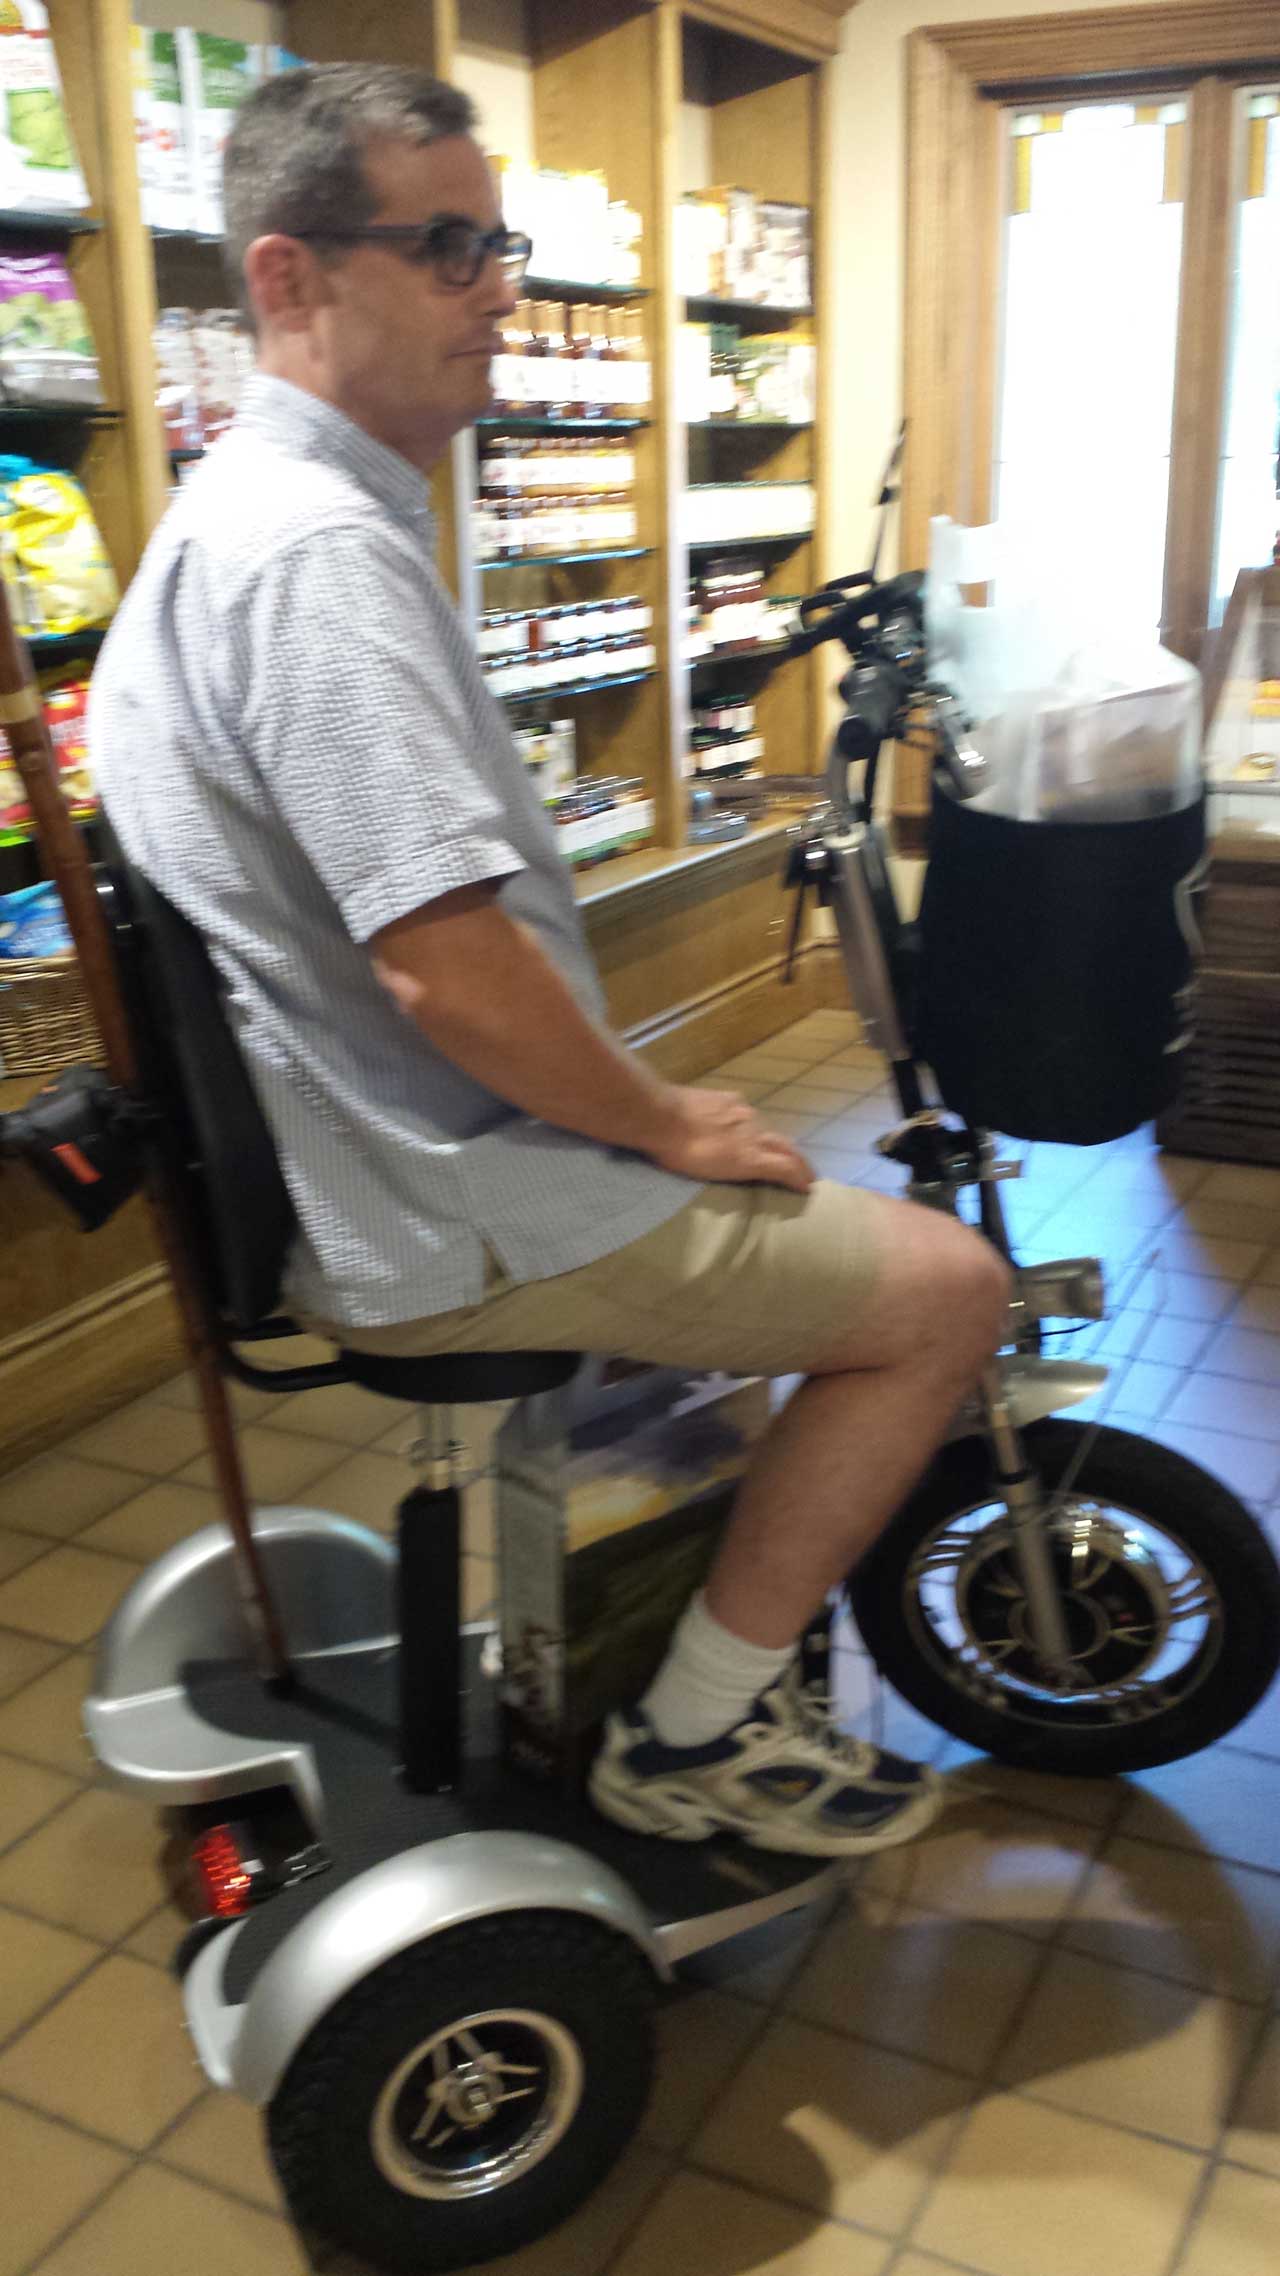 A Scooter in the Biltmore Wine Shop